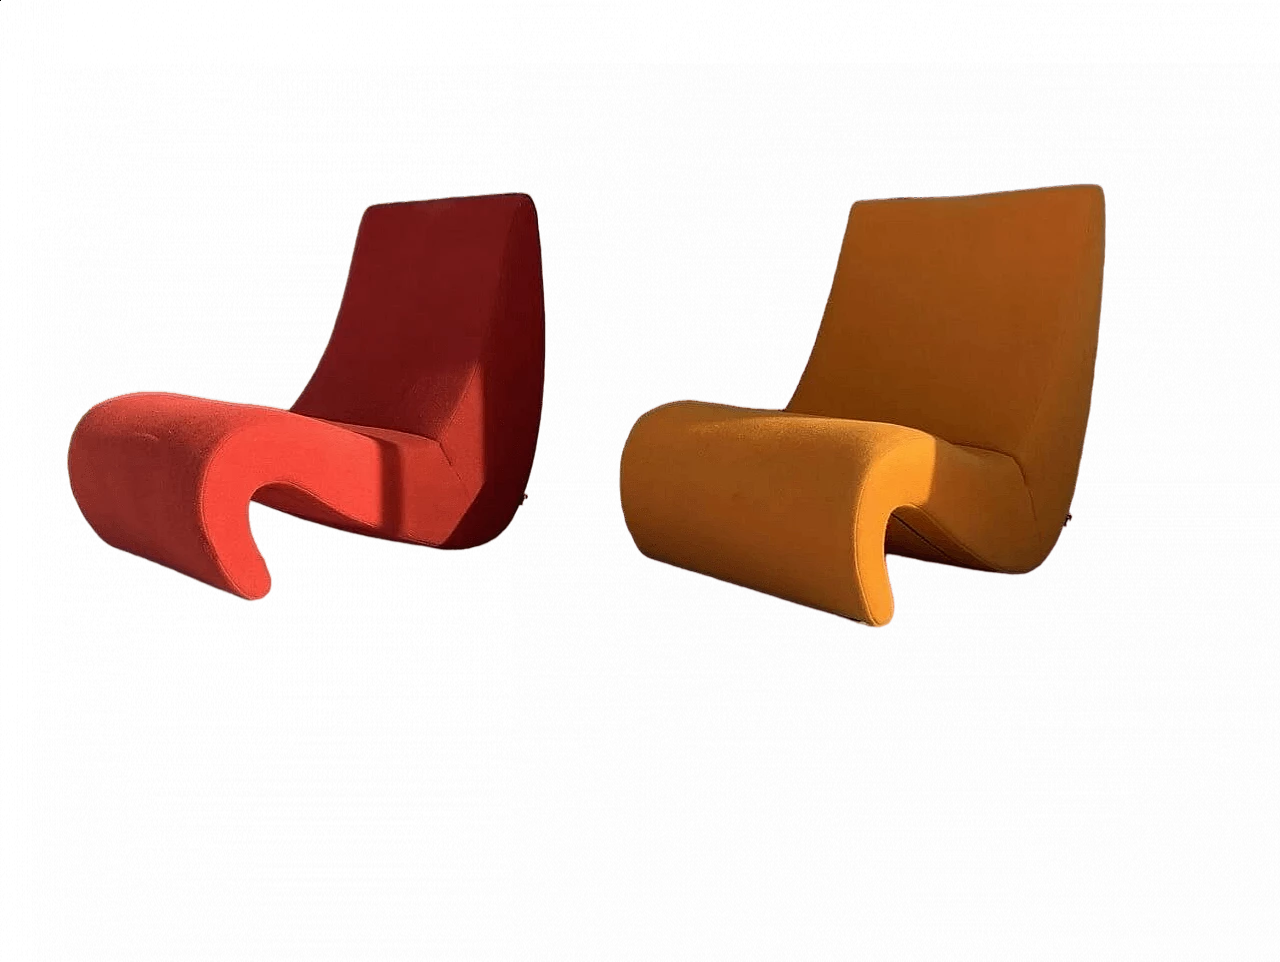 Pair of Amoebe armchairs by Verner Panton for Vitra 20